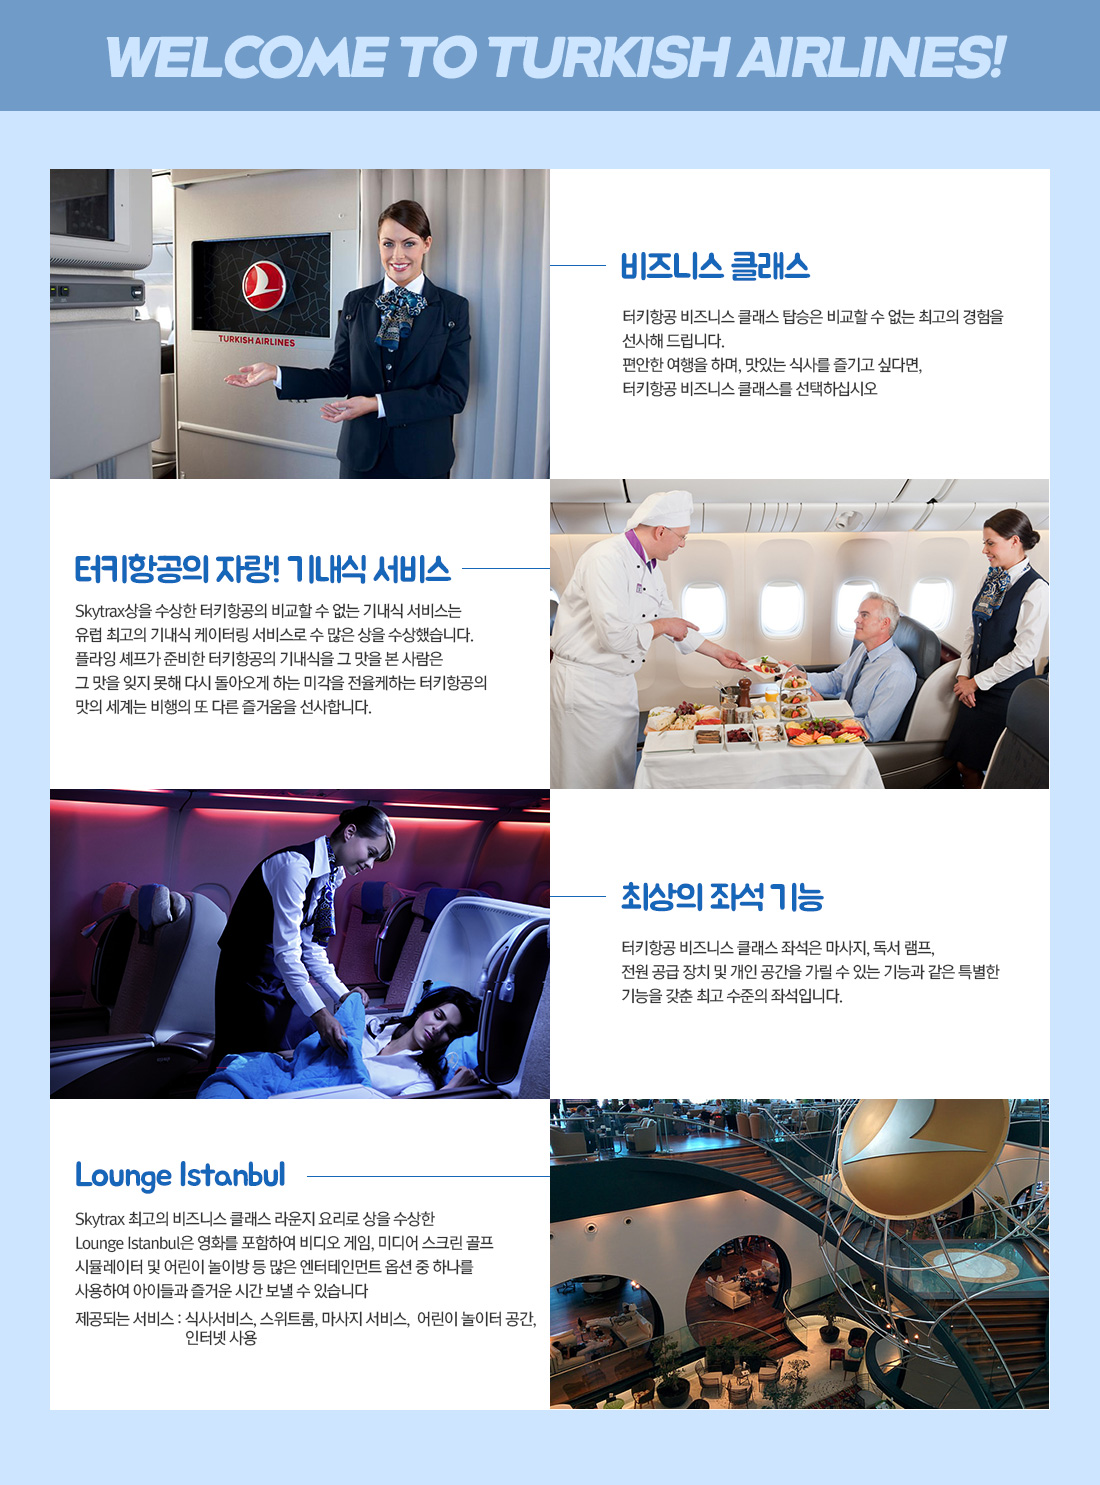 WELCOME TO TURKISH AIRLINES! 아래 설명